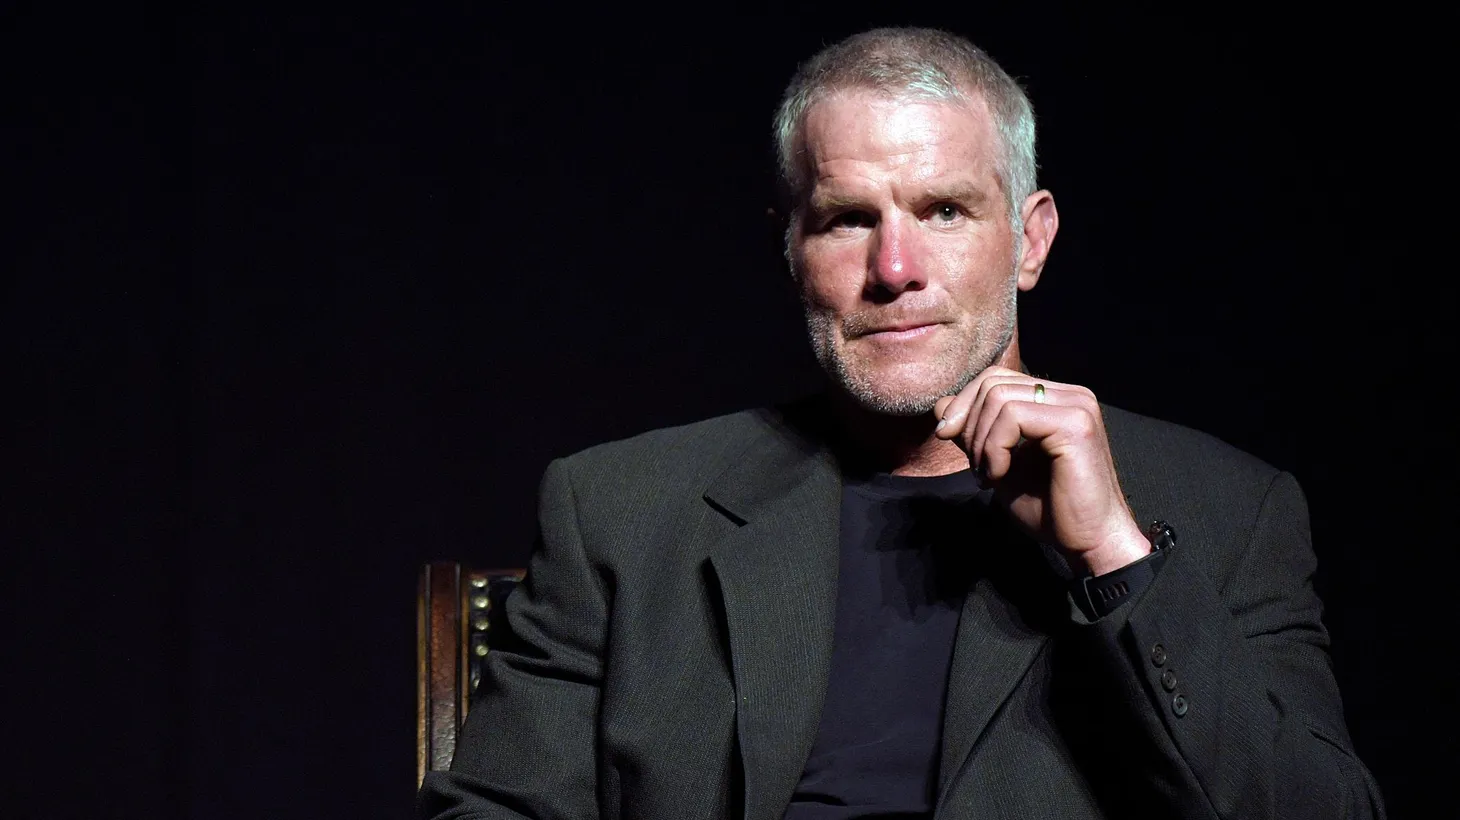 NFL Hall of Fame quarterback Brett Favre is one of dozens implicated in Mississippi’s largest public corruption case.